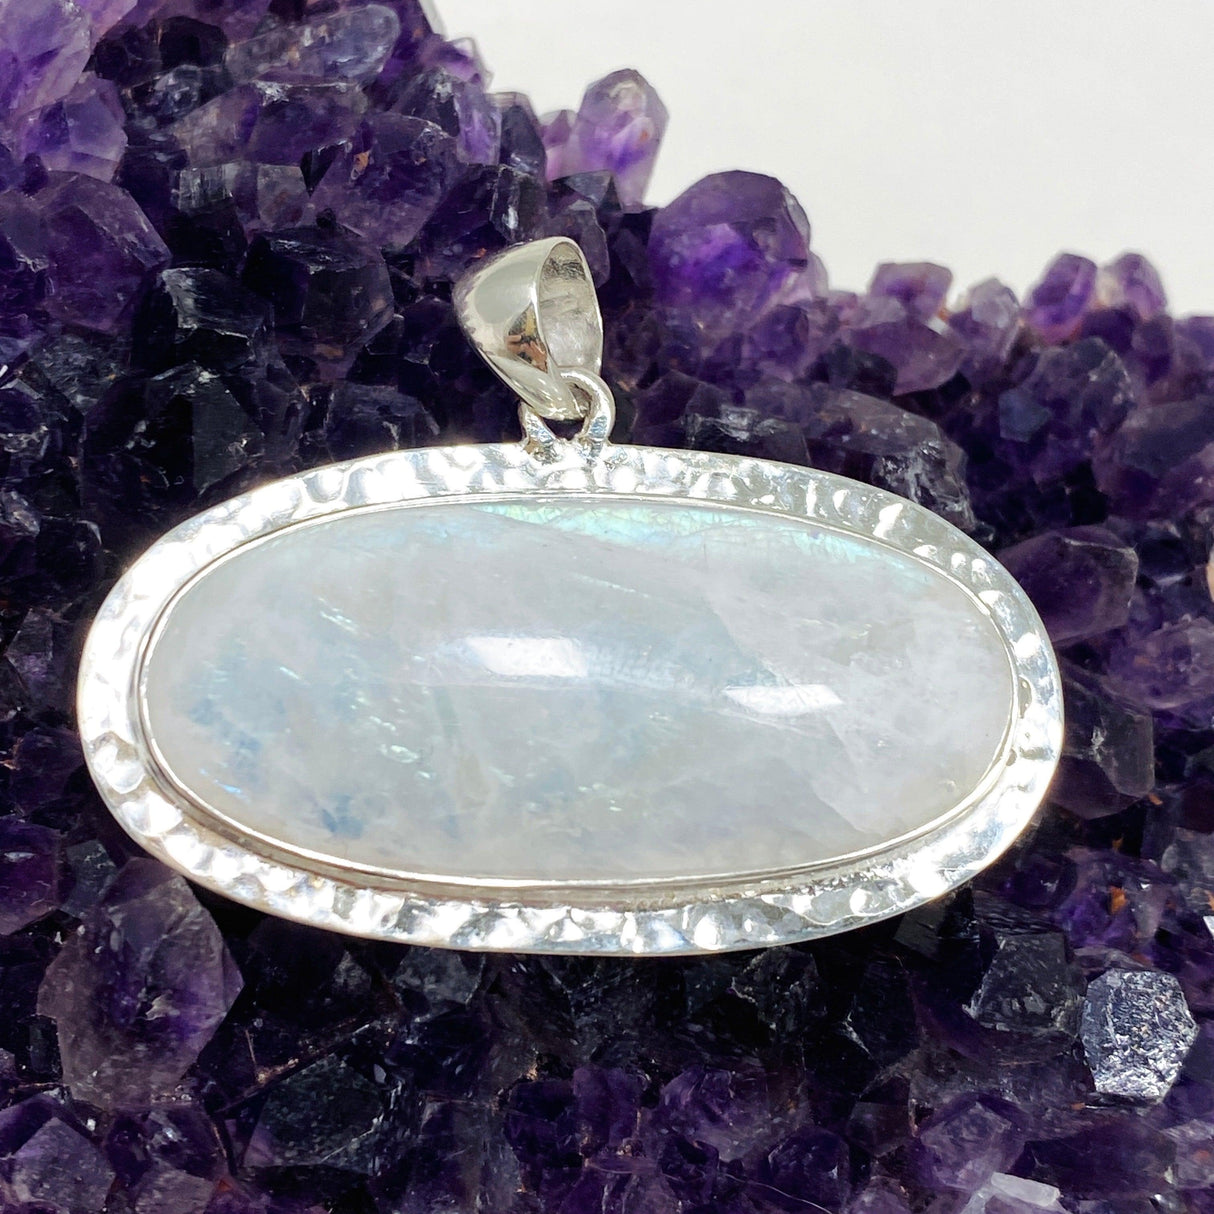 Moonstone Oval Pendant with Hammered Setting KPGJ4242 - Nature's Magick